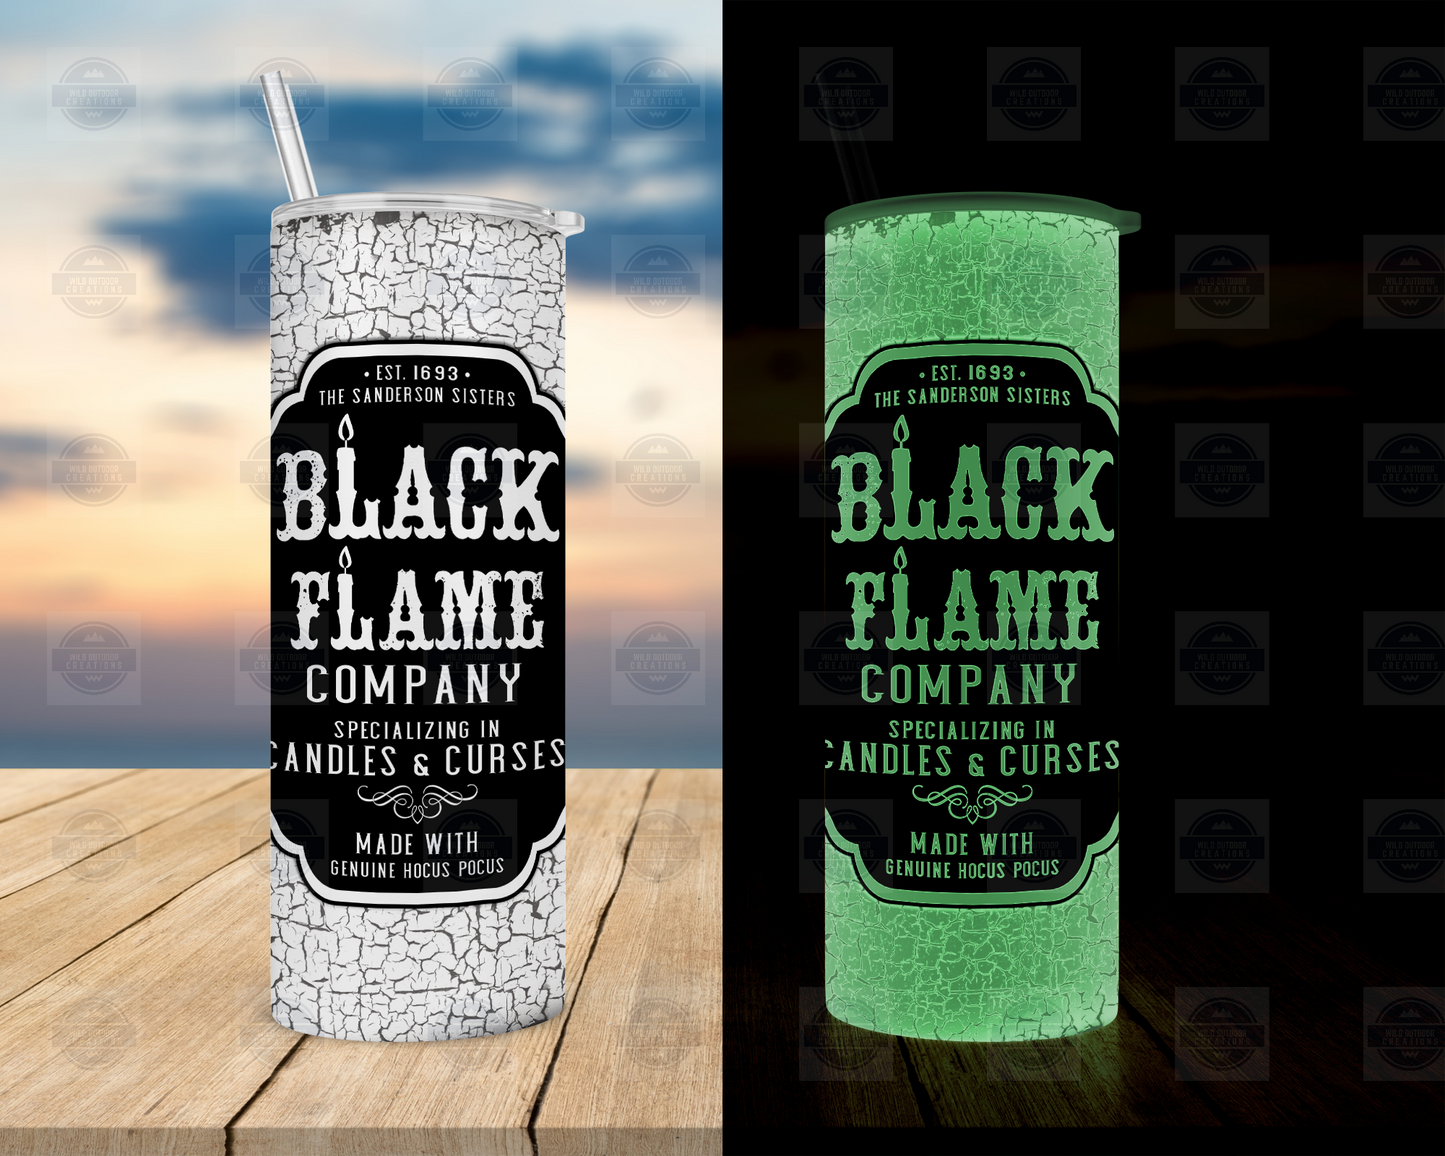 Black Flame Glow in Dark 20oz Skinny Tumbler with Straw and Lid